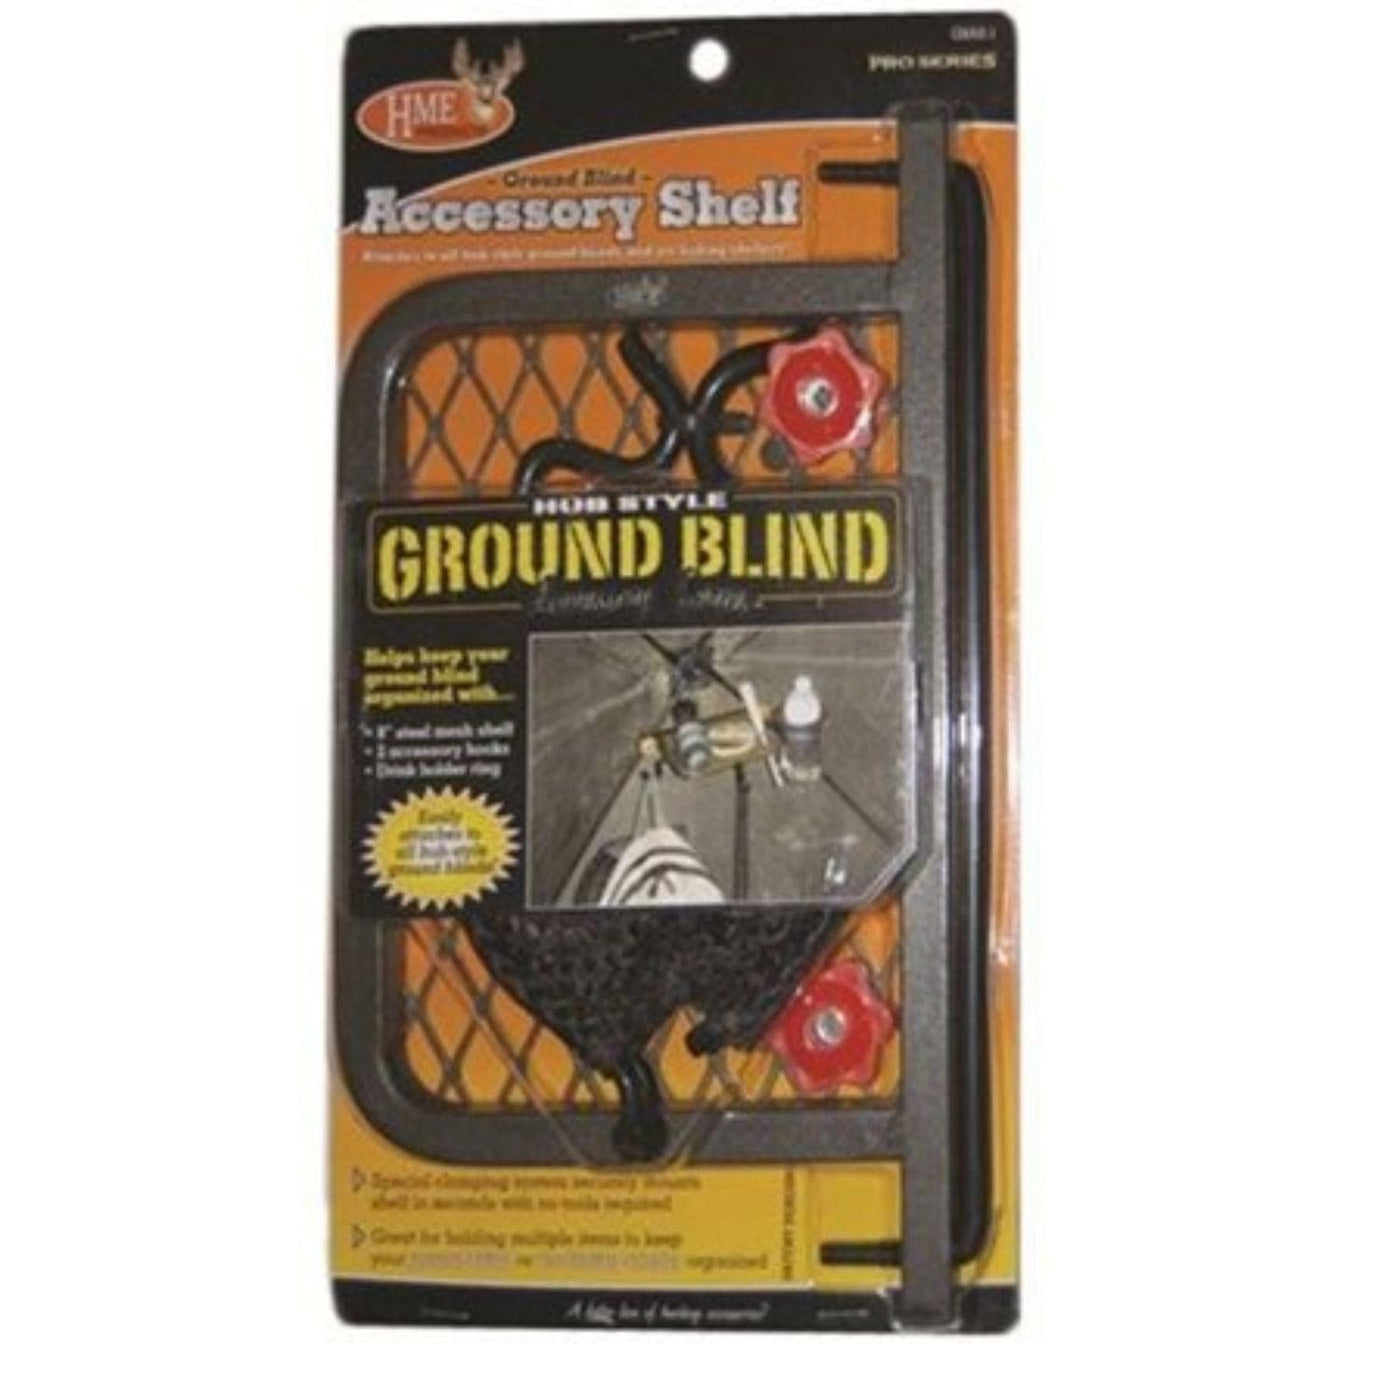 HME HME Ground Blind 8 Inch Shelf with DHR and 2HK Hunting